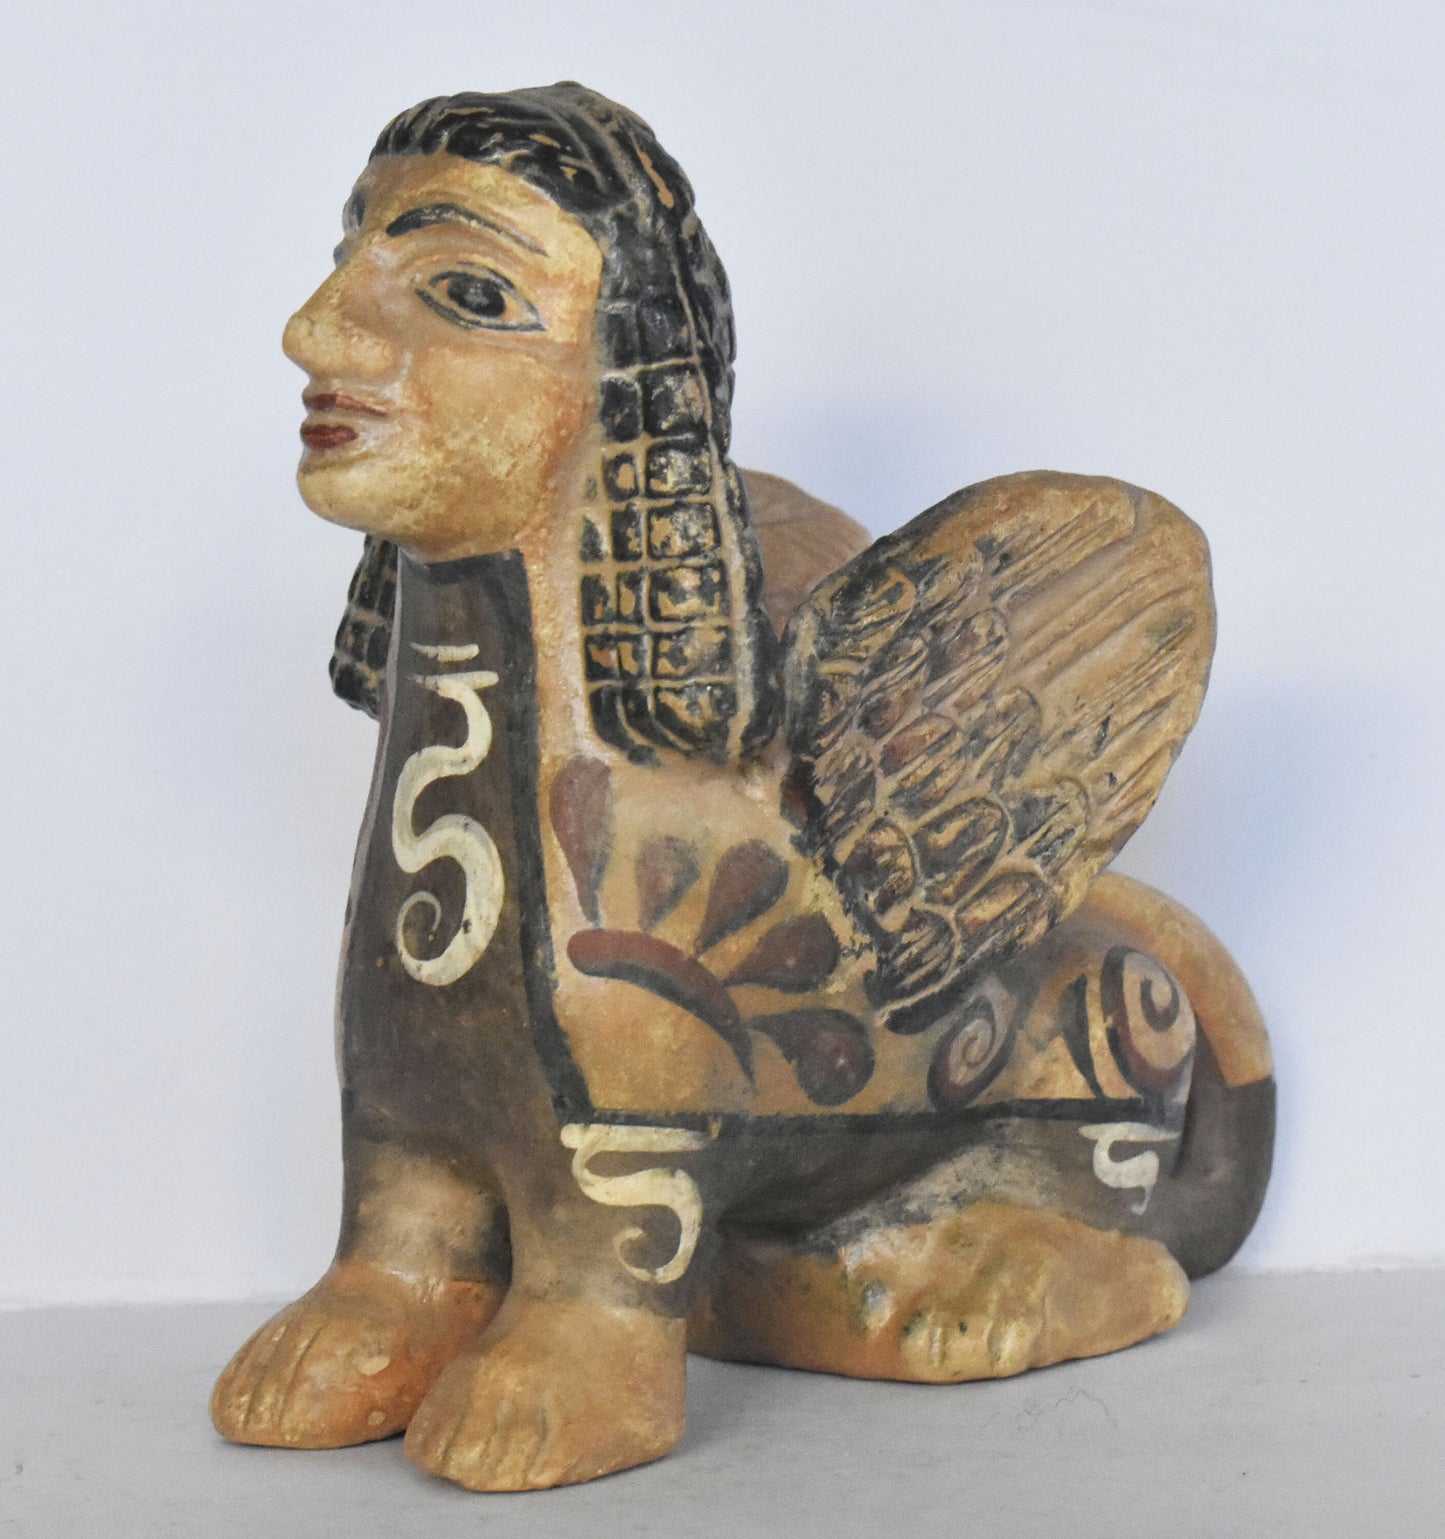 Sphinx -  Attica, Athens - 600 BC - Composition of the Mortal and the Immortal - Miniature - Museum Reproduction - Ceramic Artifact